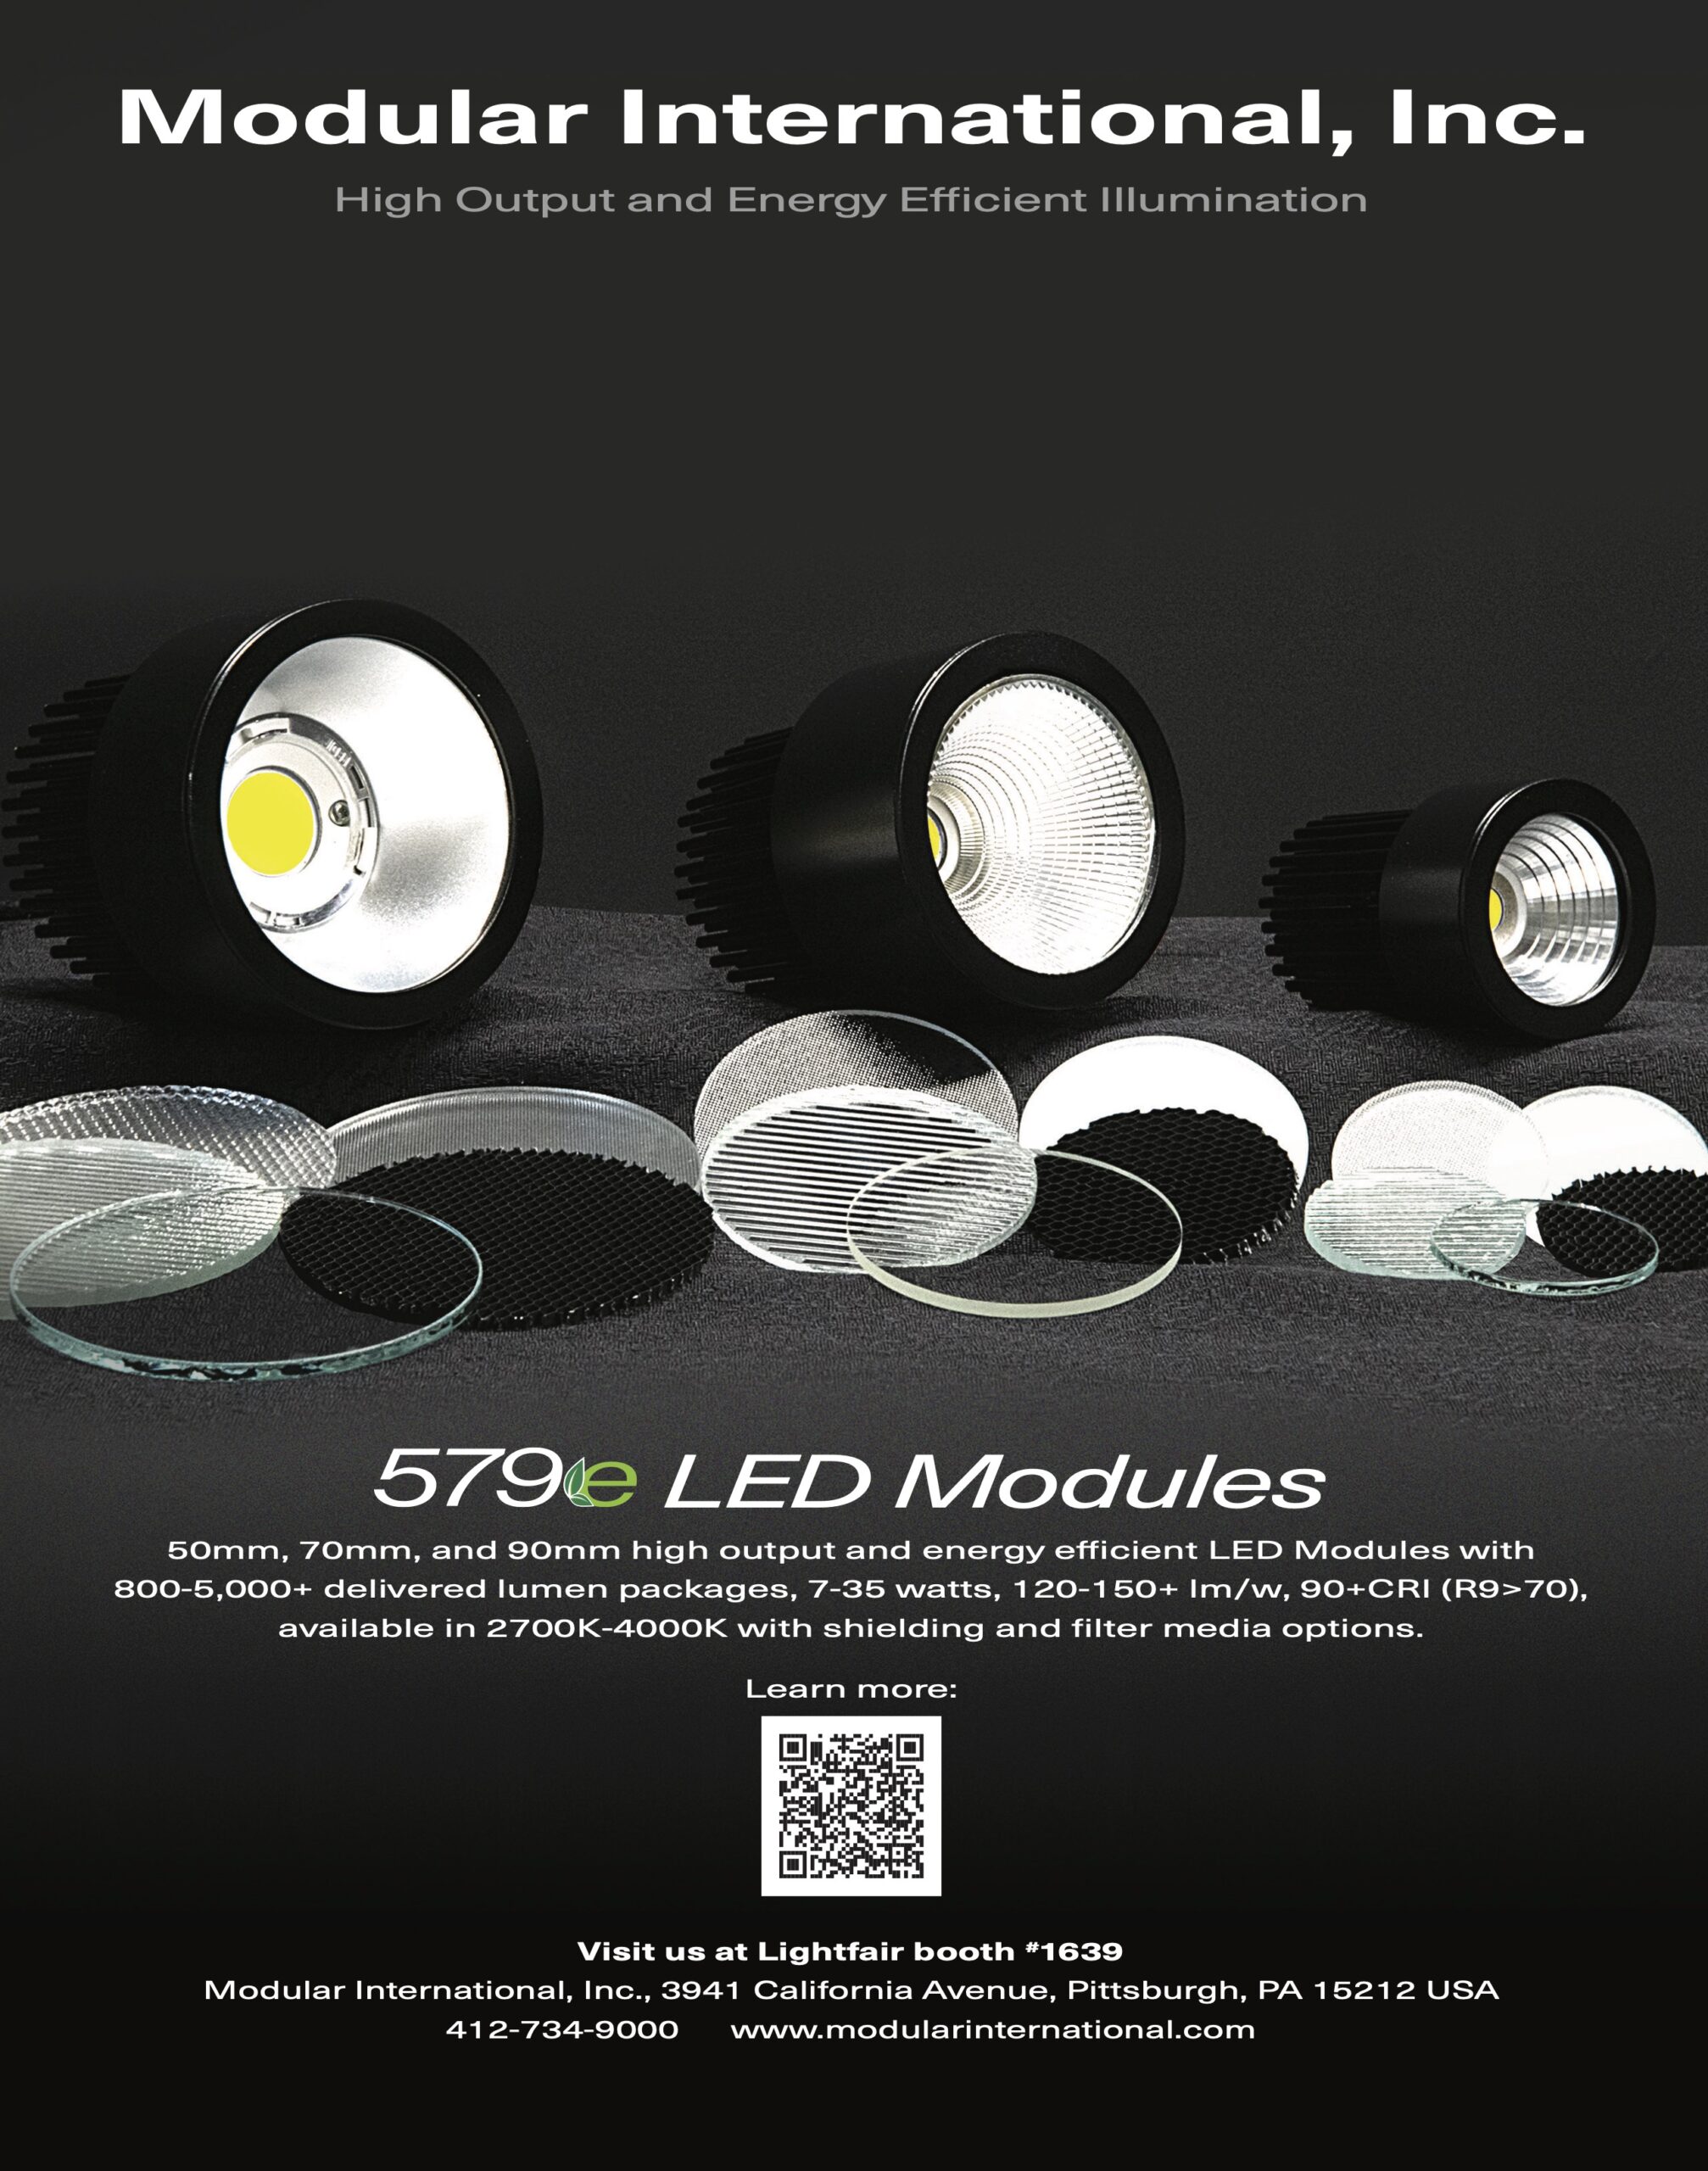 Our 579e LED Module has Garnered the Spotlight in the Current issue of LD+A Magazine